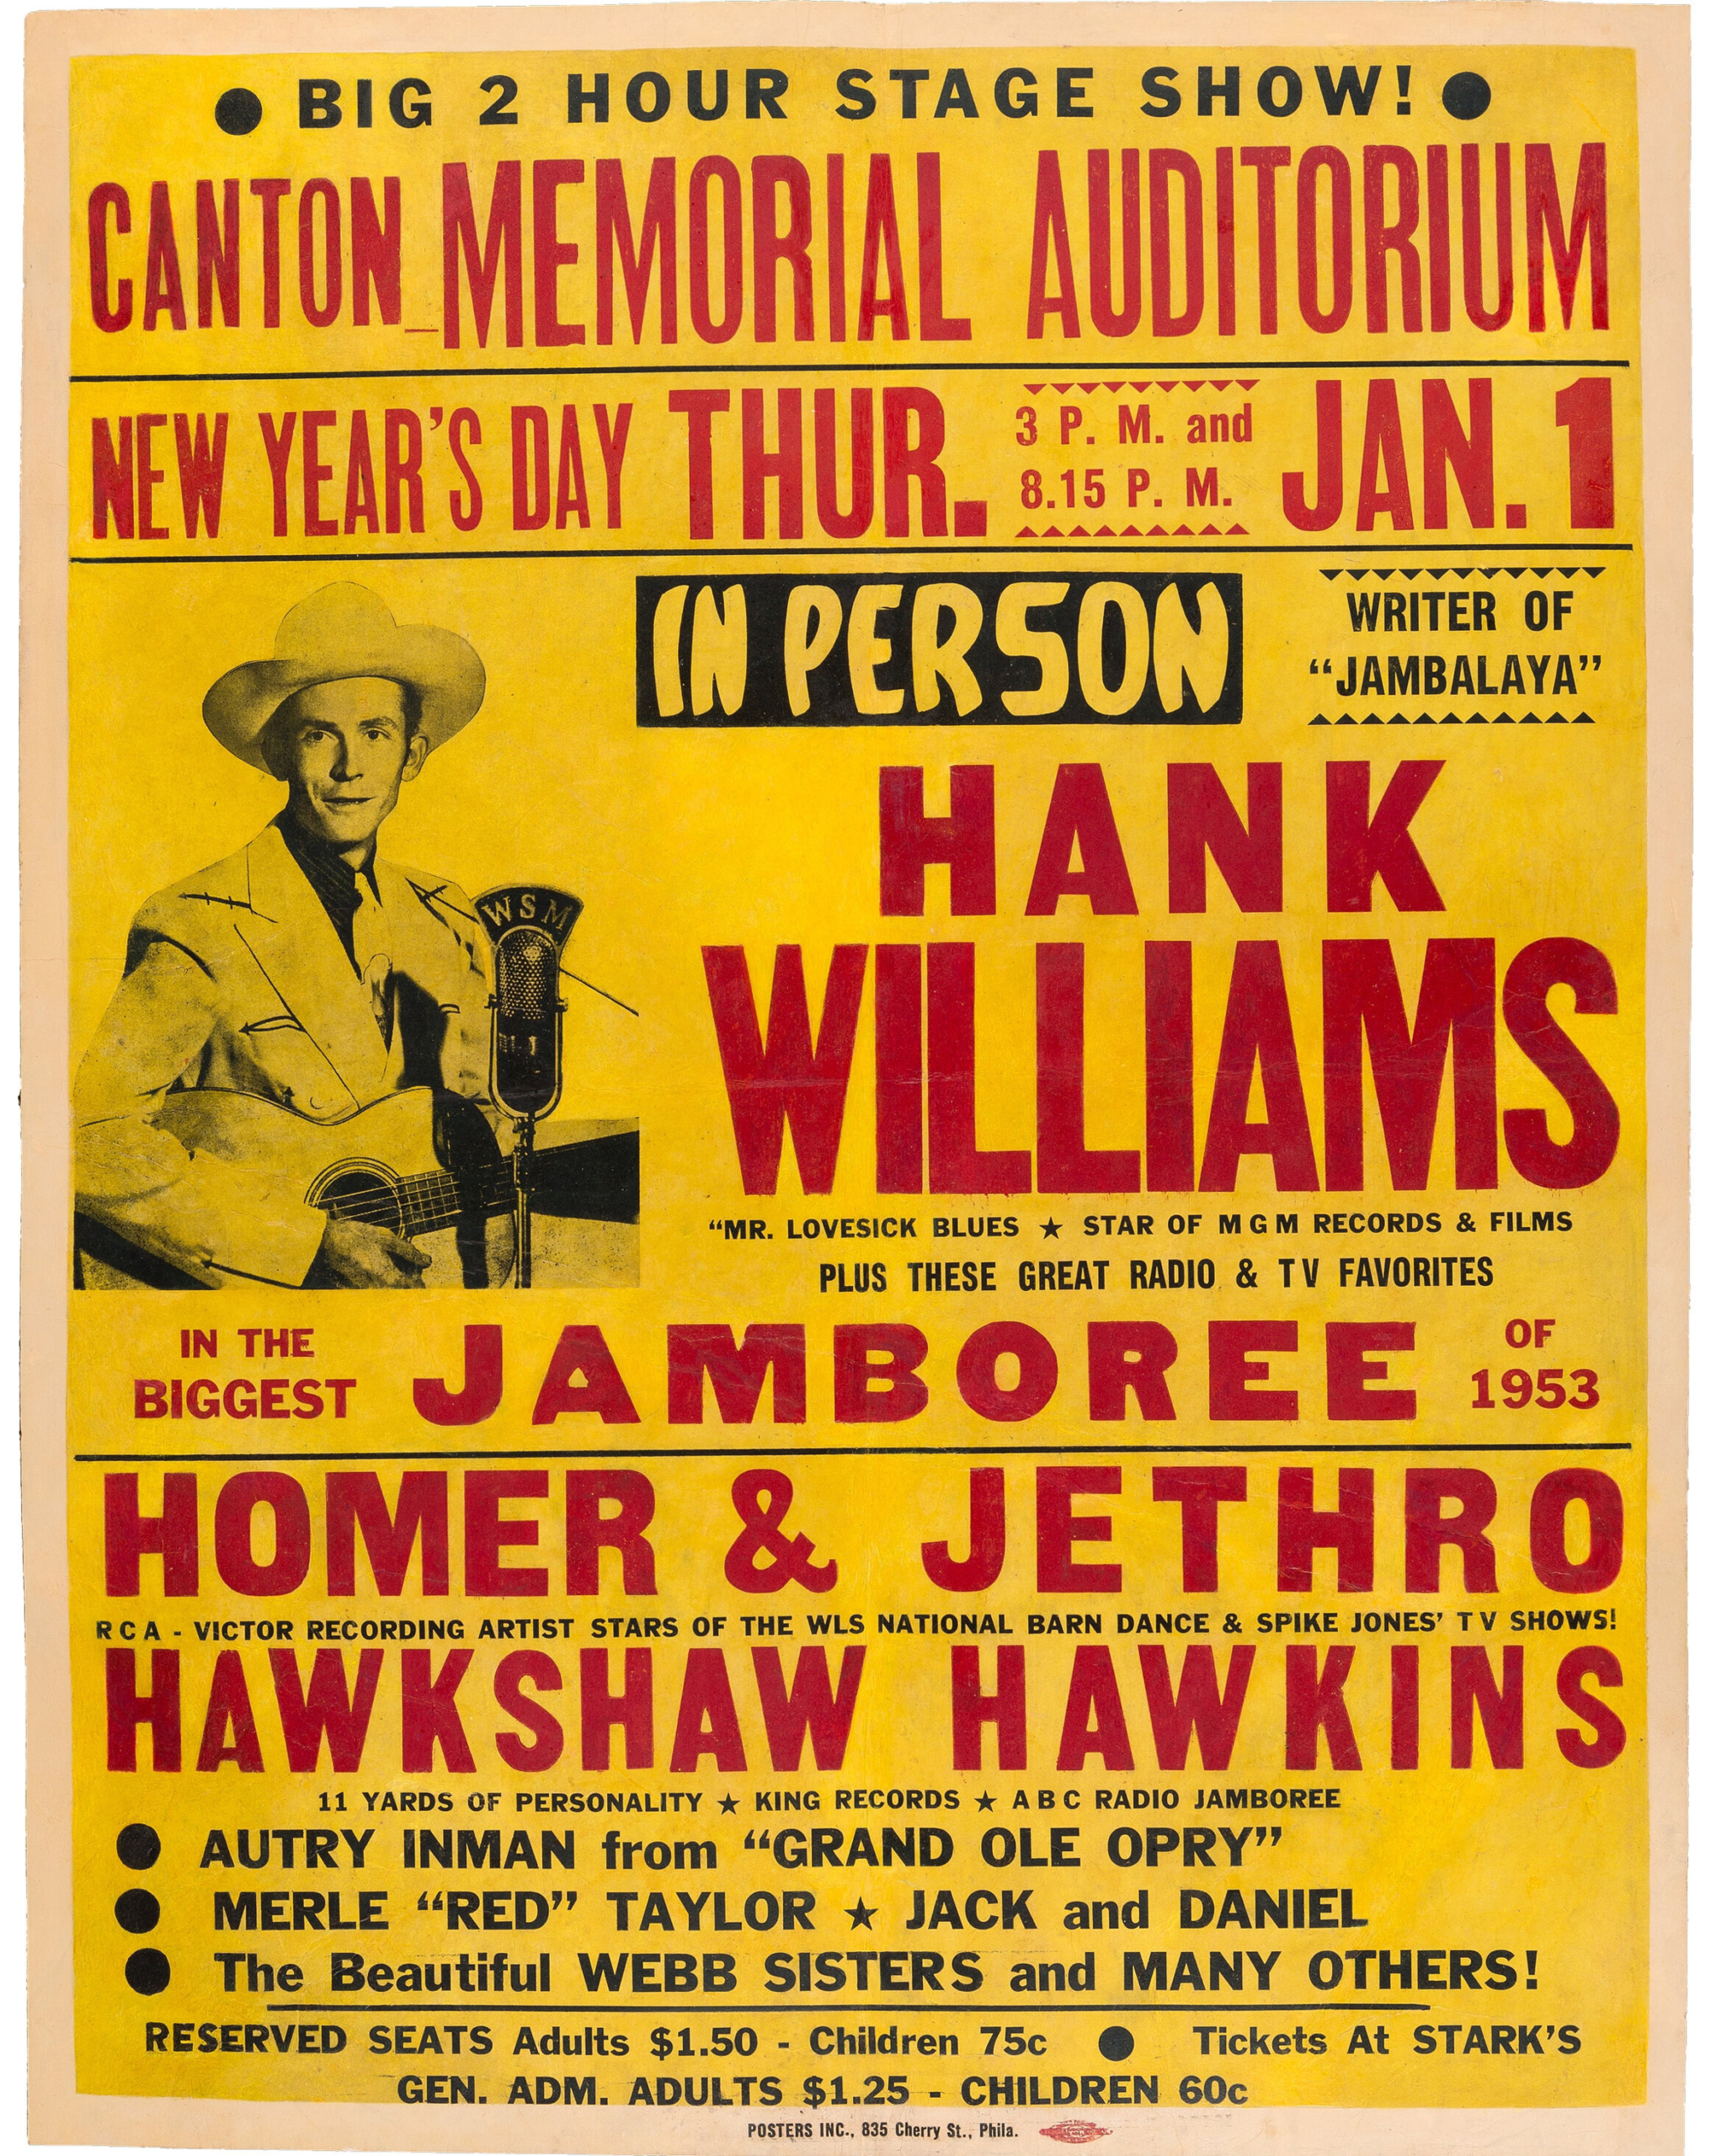 In May 2021, a 1953 Hank Williams poster touting an Ohio show that he would not live to play sold for $150,000 and a new world auction record. The November 6 auction contains another copy estimated at $80,000-$120,000.